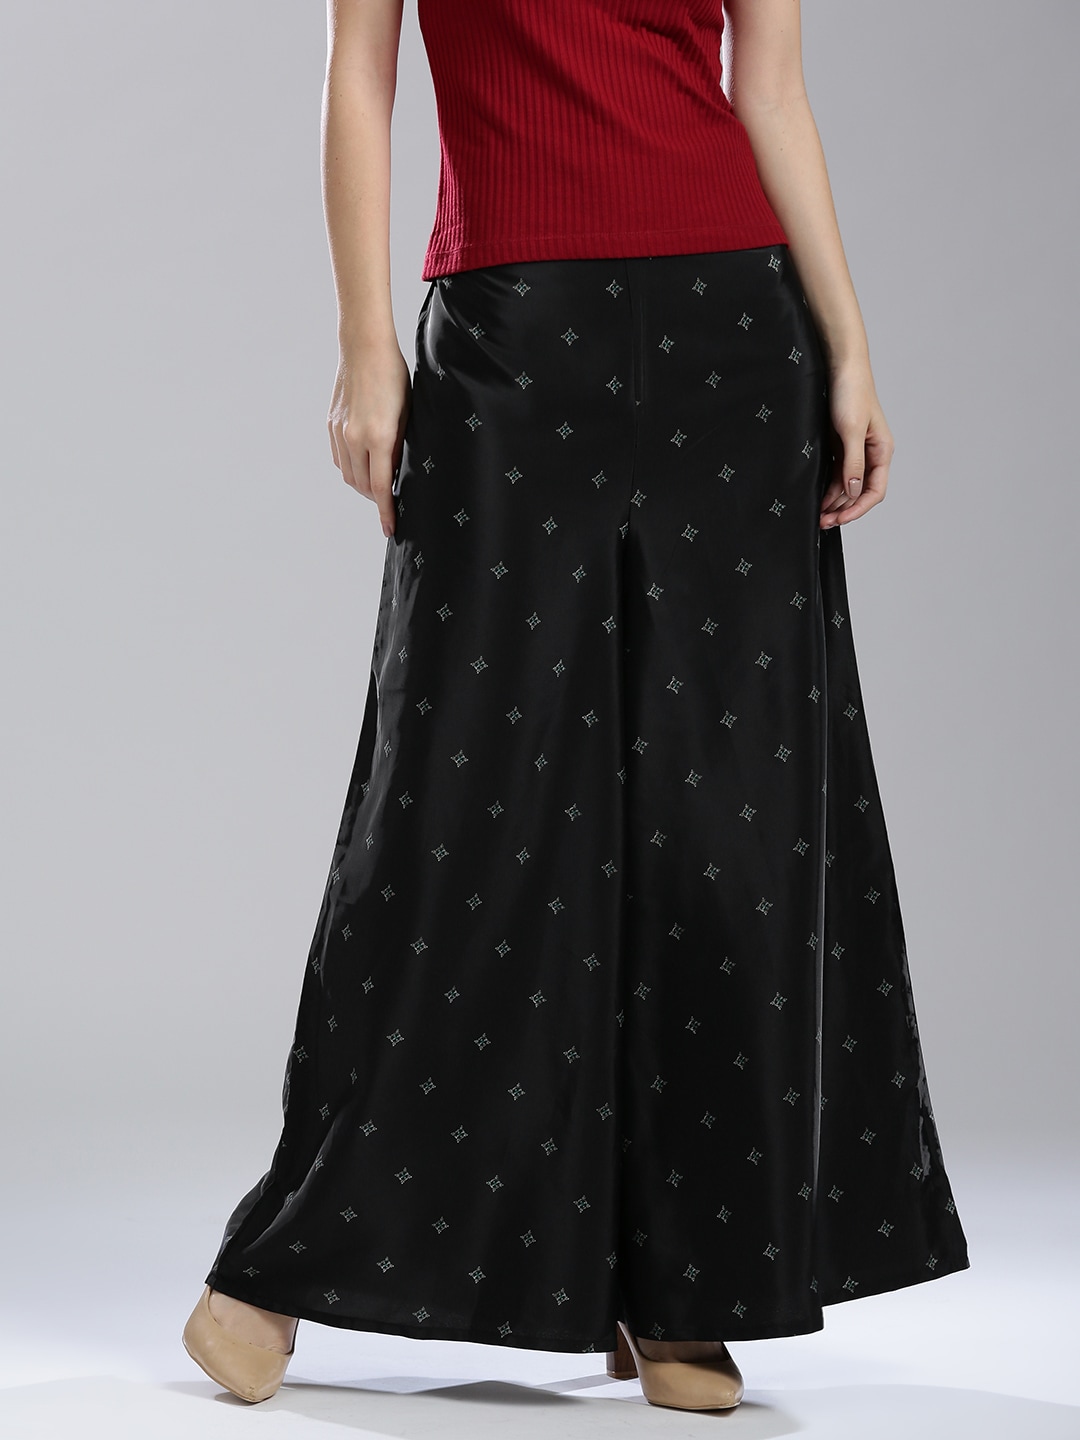 Wishful by W Women Black Flared Printed Palazzos Price in India